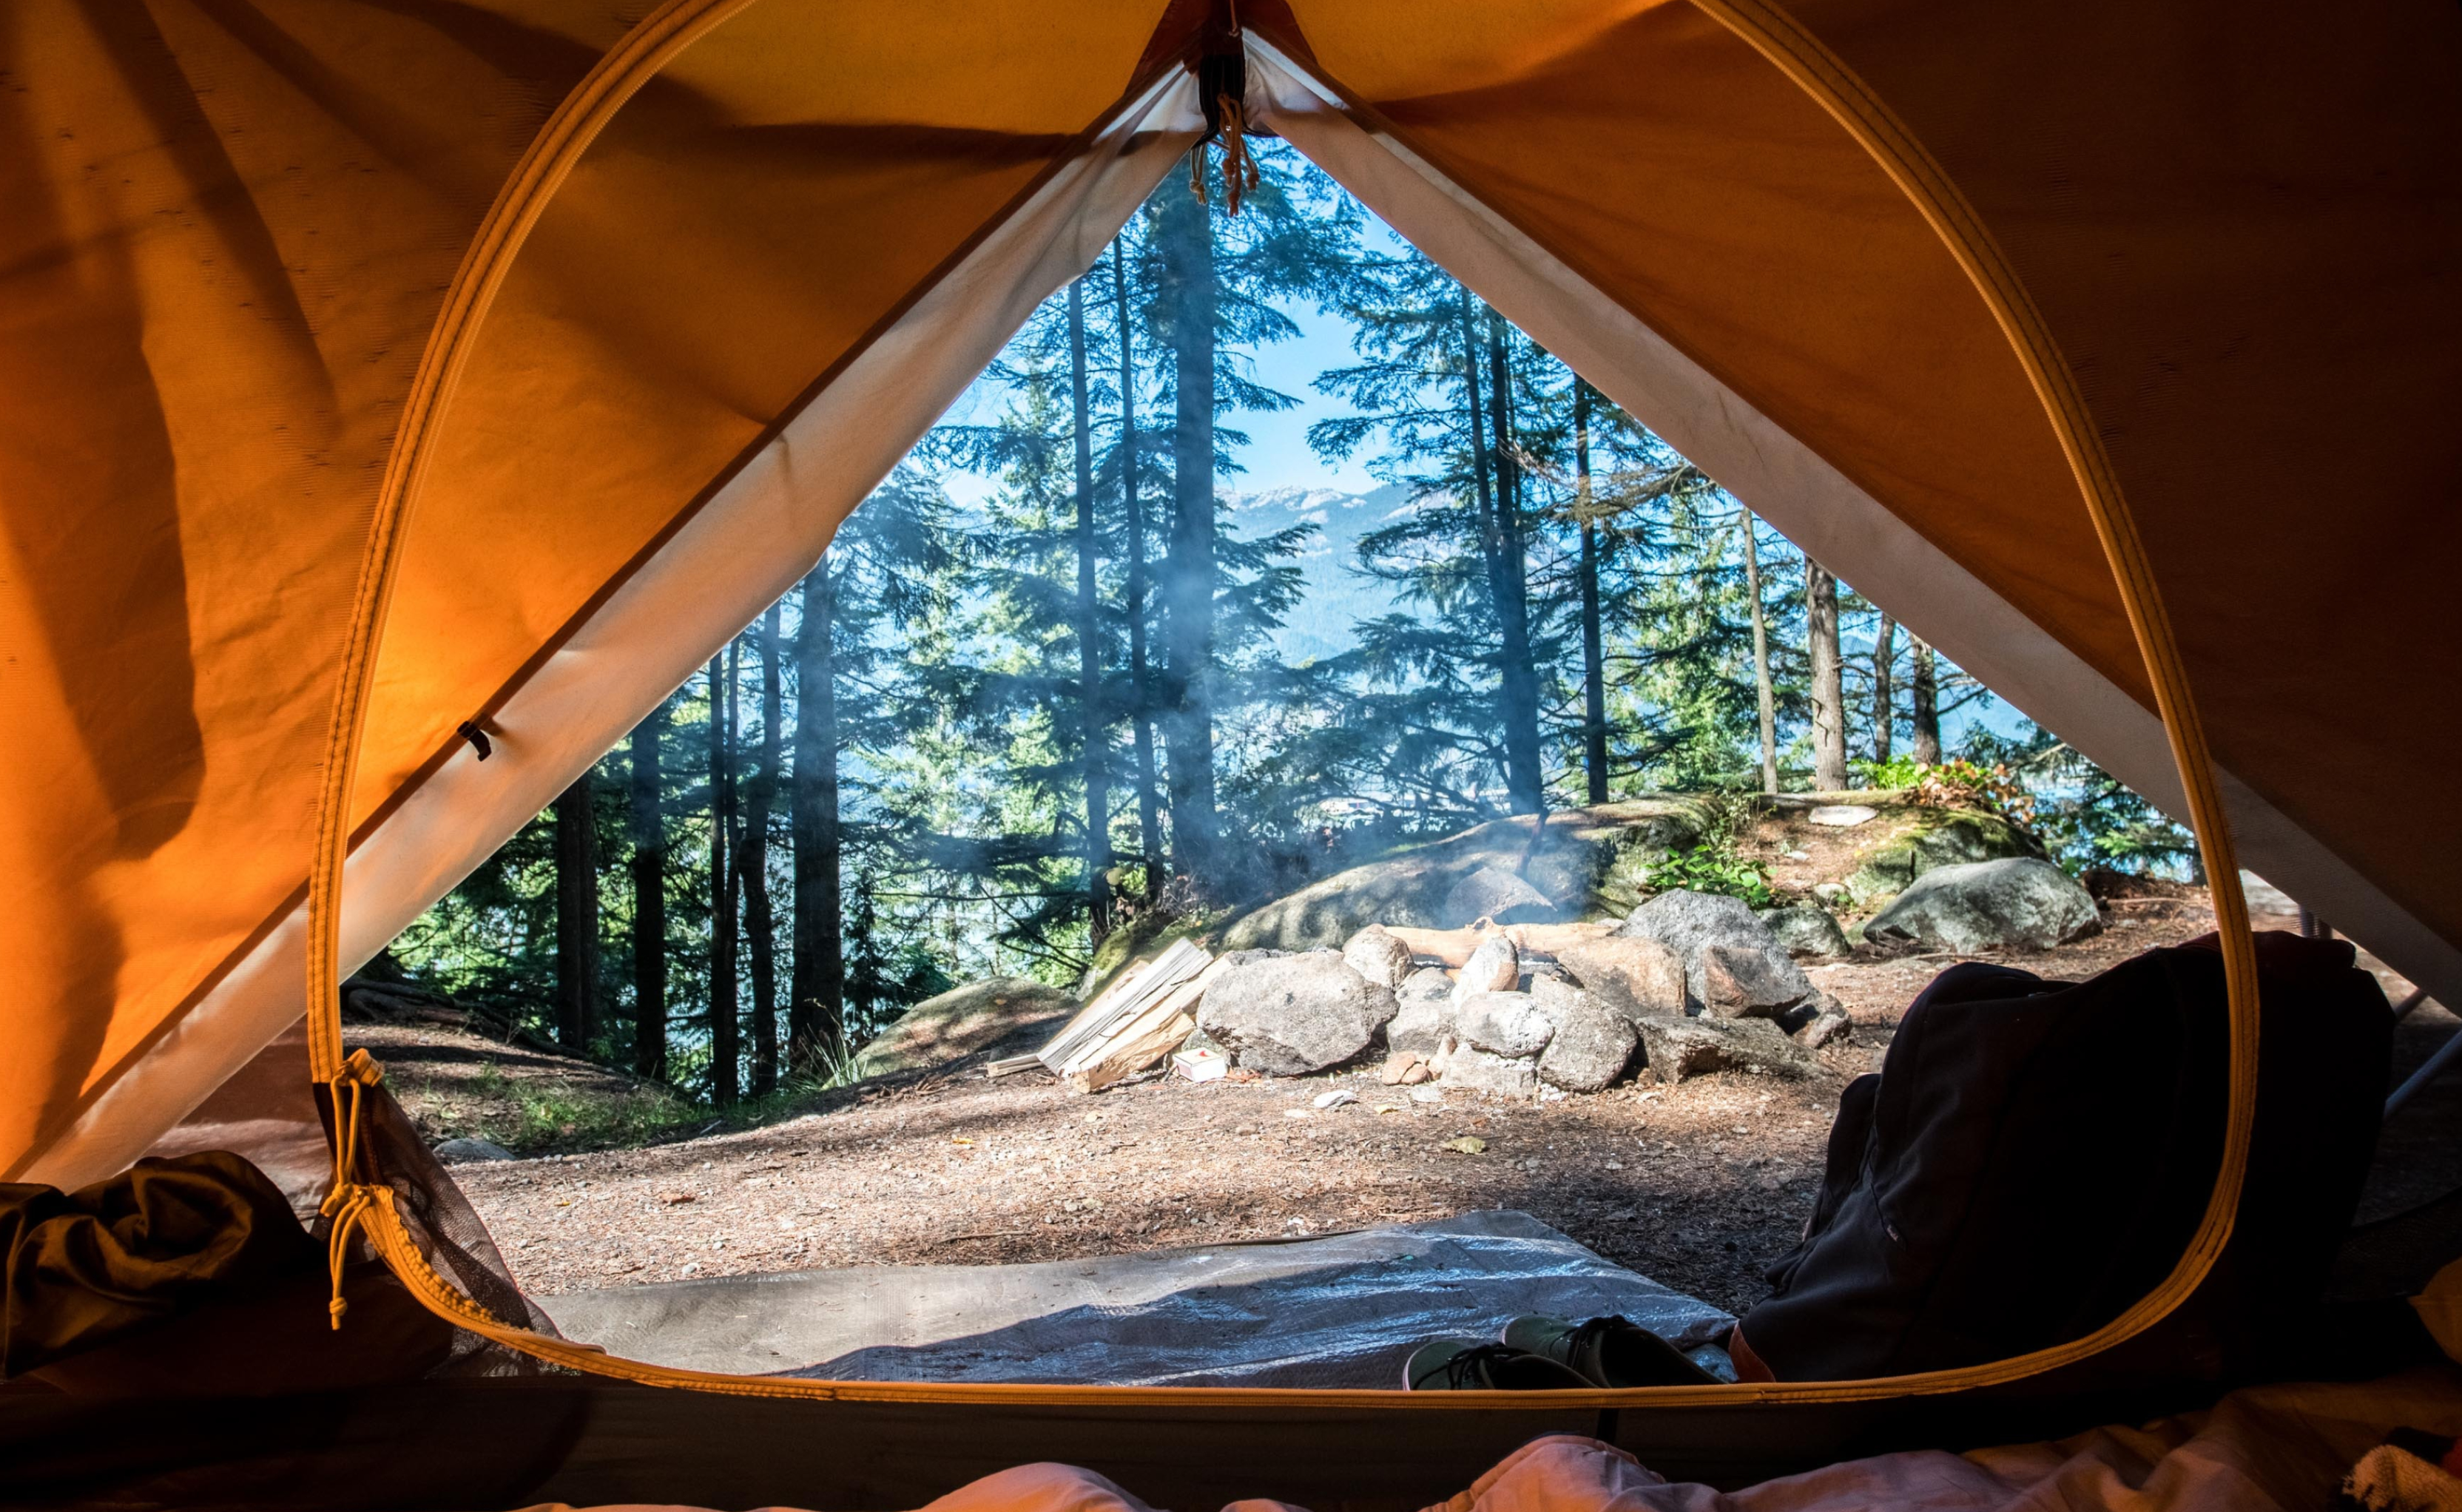 An image captured from within a tent, showcasing a scenic forest view with lush trees and rocky terrain all around.